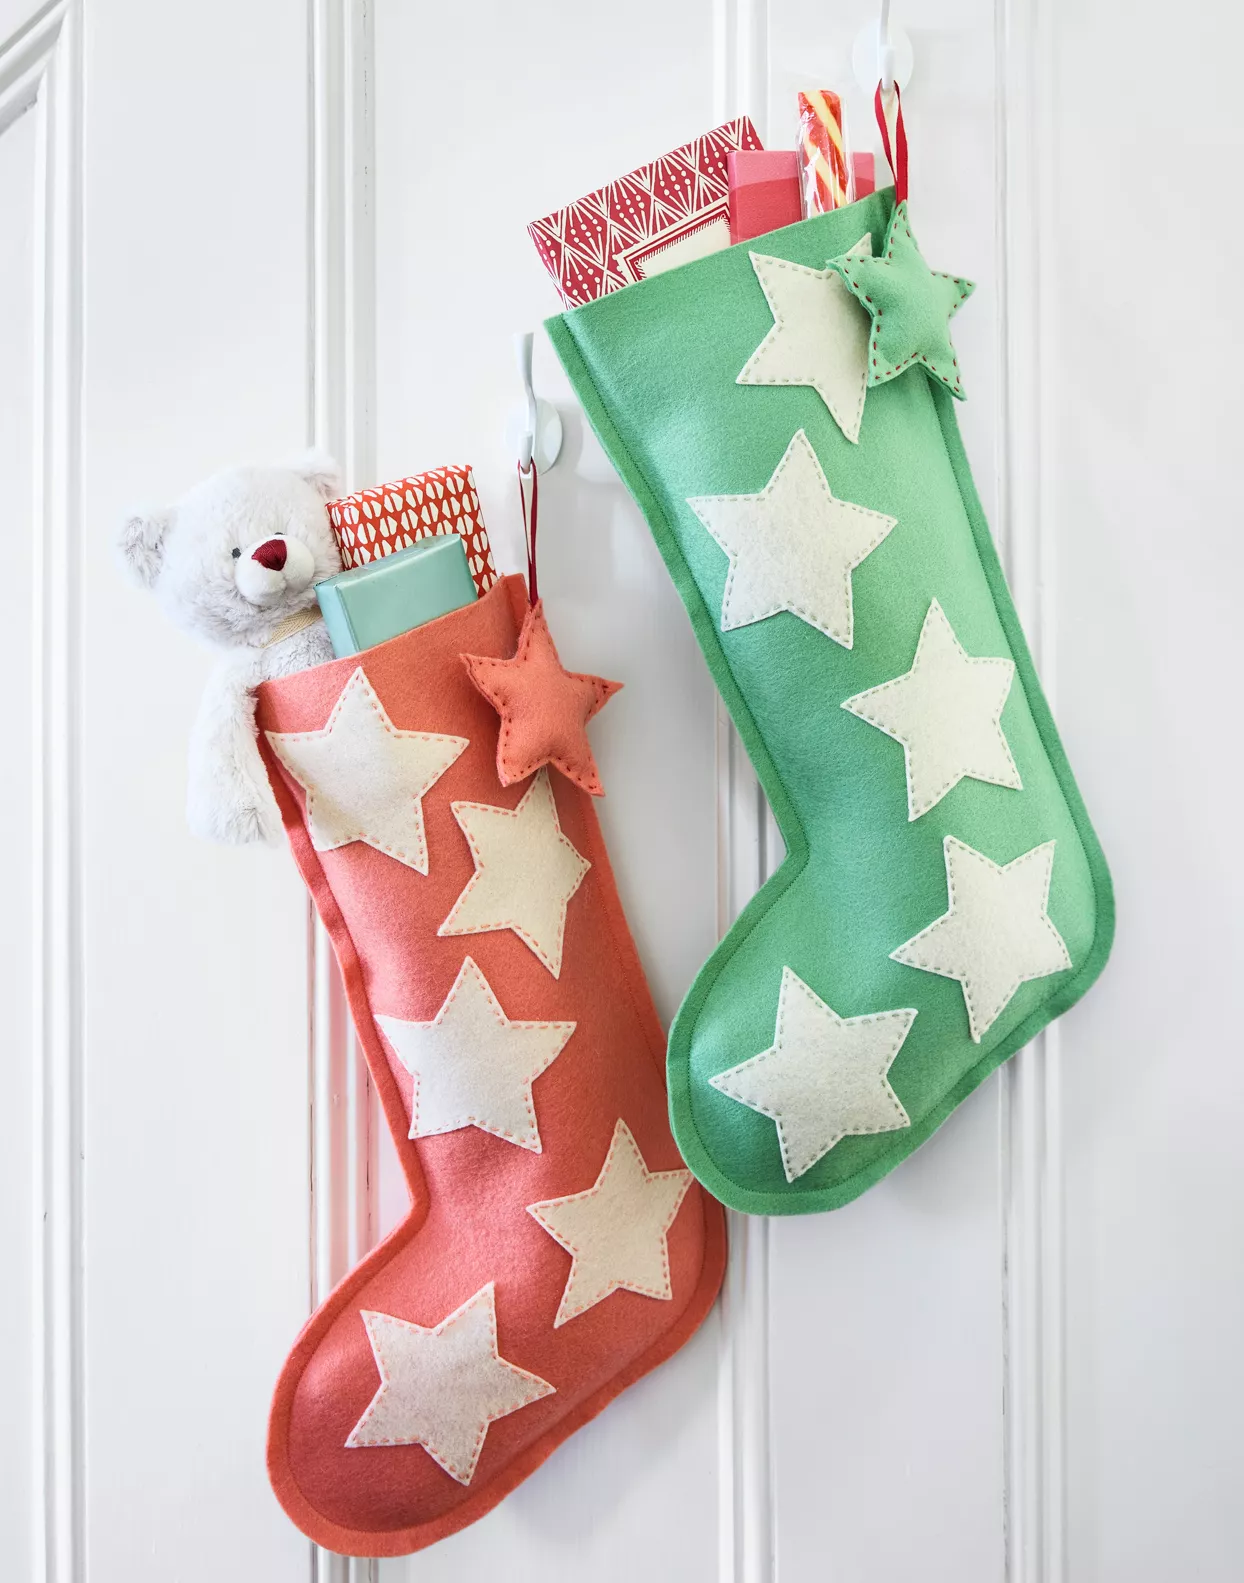 How to Make a Felt Christmas Stocking With Stars